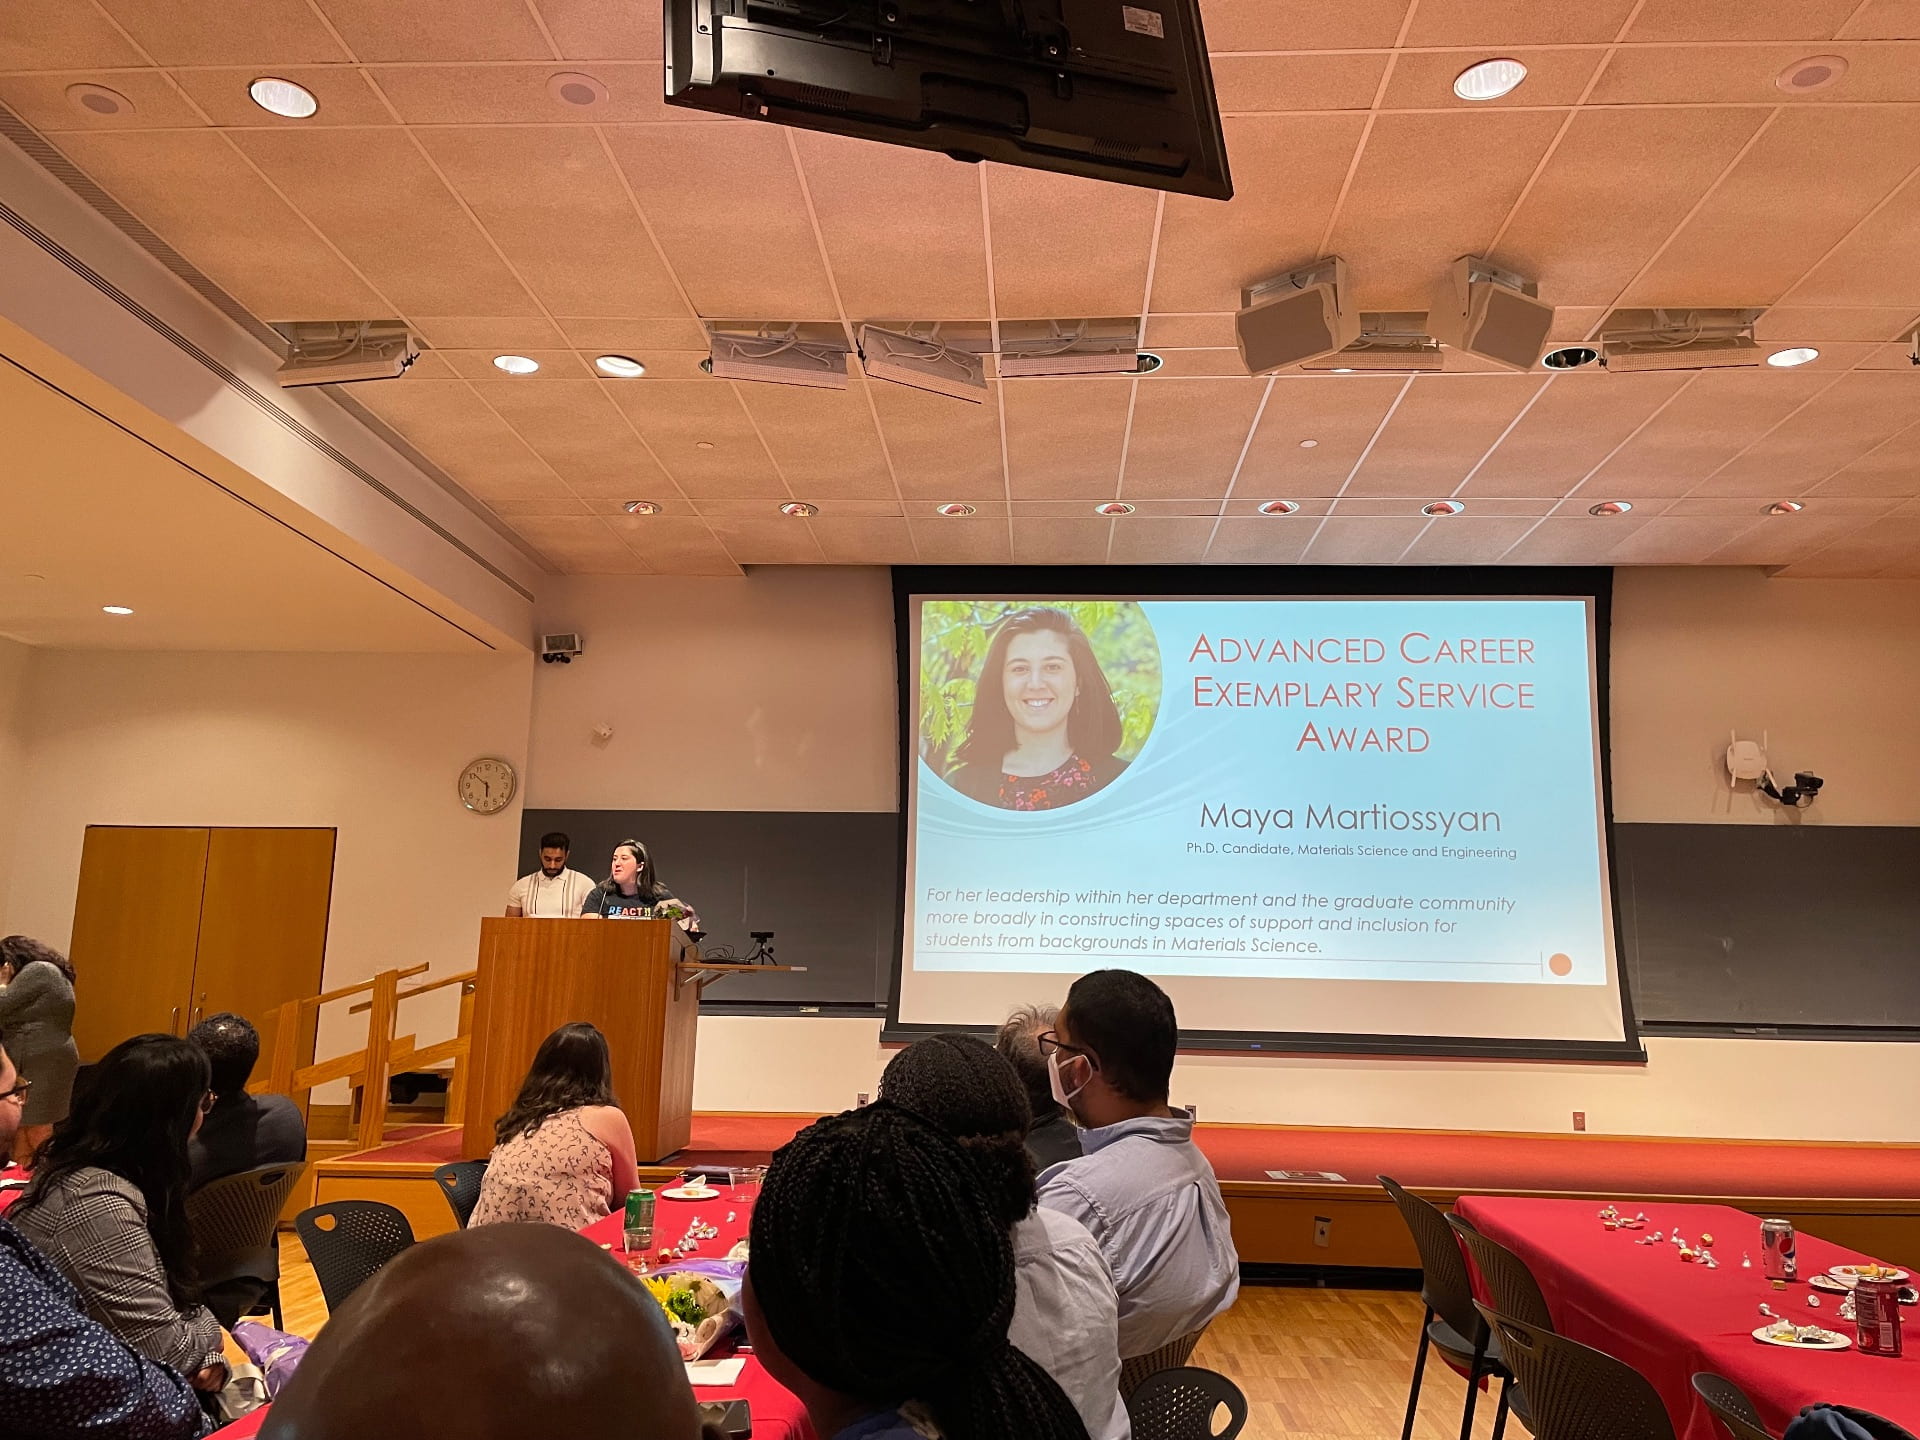 Maya Martirossyan, receiving an Exemplary Service Award for Advanced Career Students at the 2023 Graduate Diversity and Inclusion Awards & Recognition Celebration.